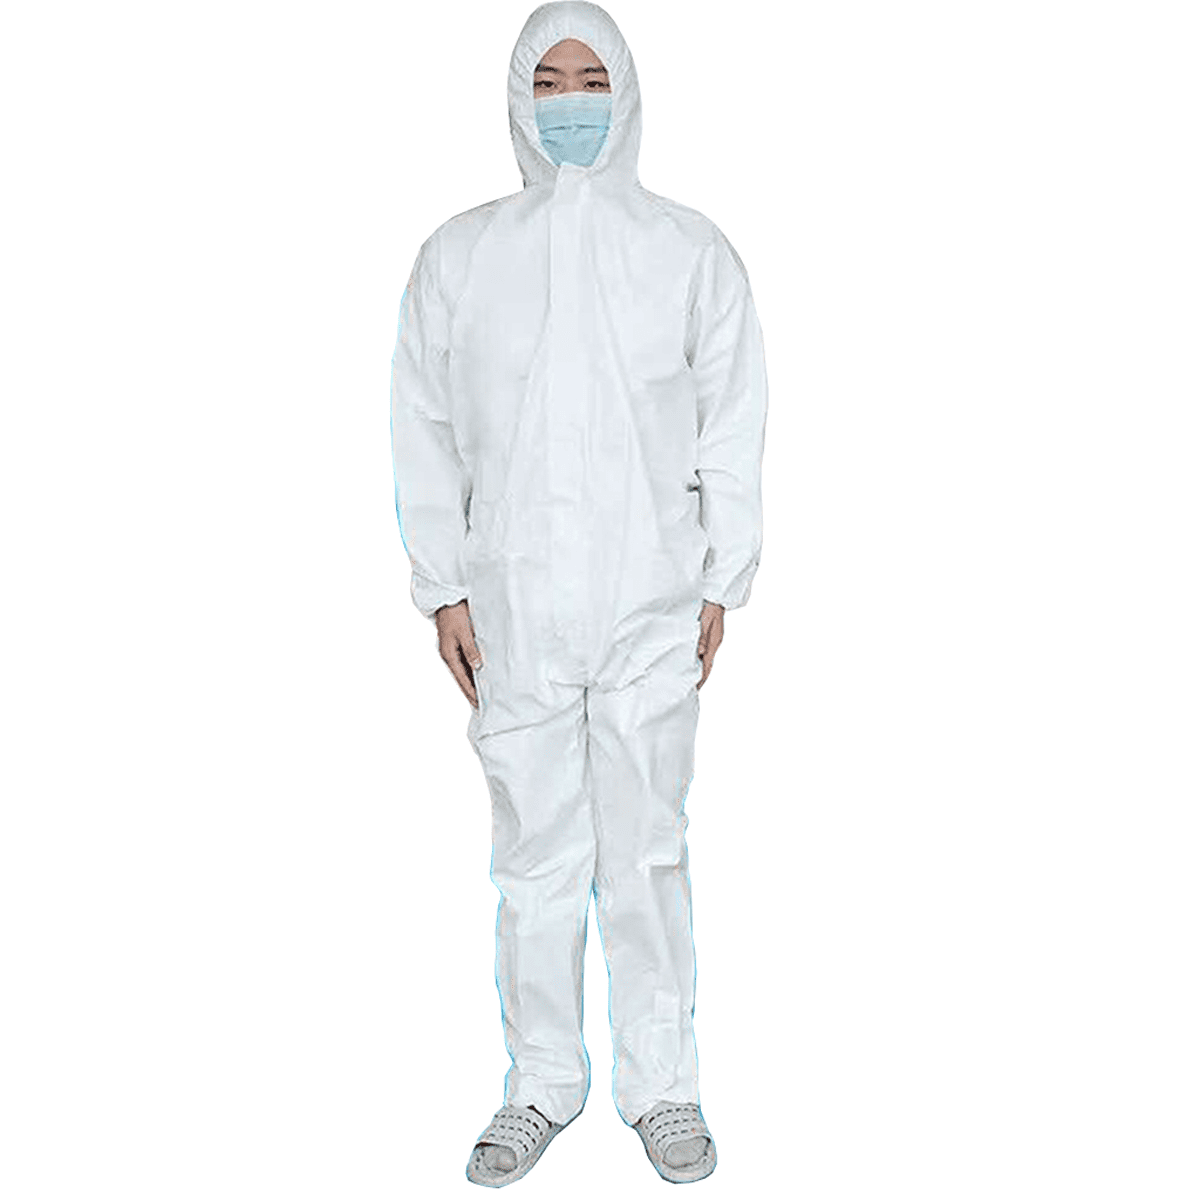 Disposable Coveralls White Boilersuit Hood Painters Protective Overalls Suit 